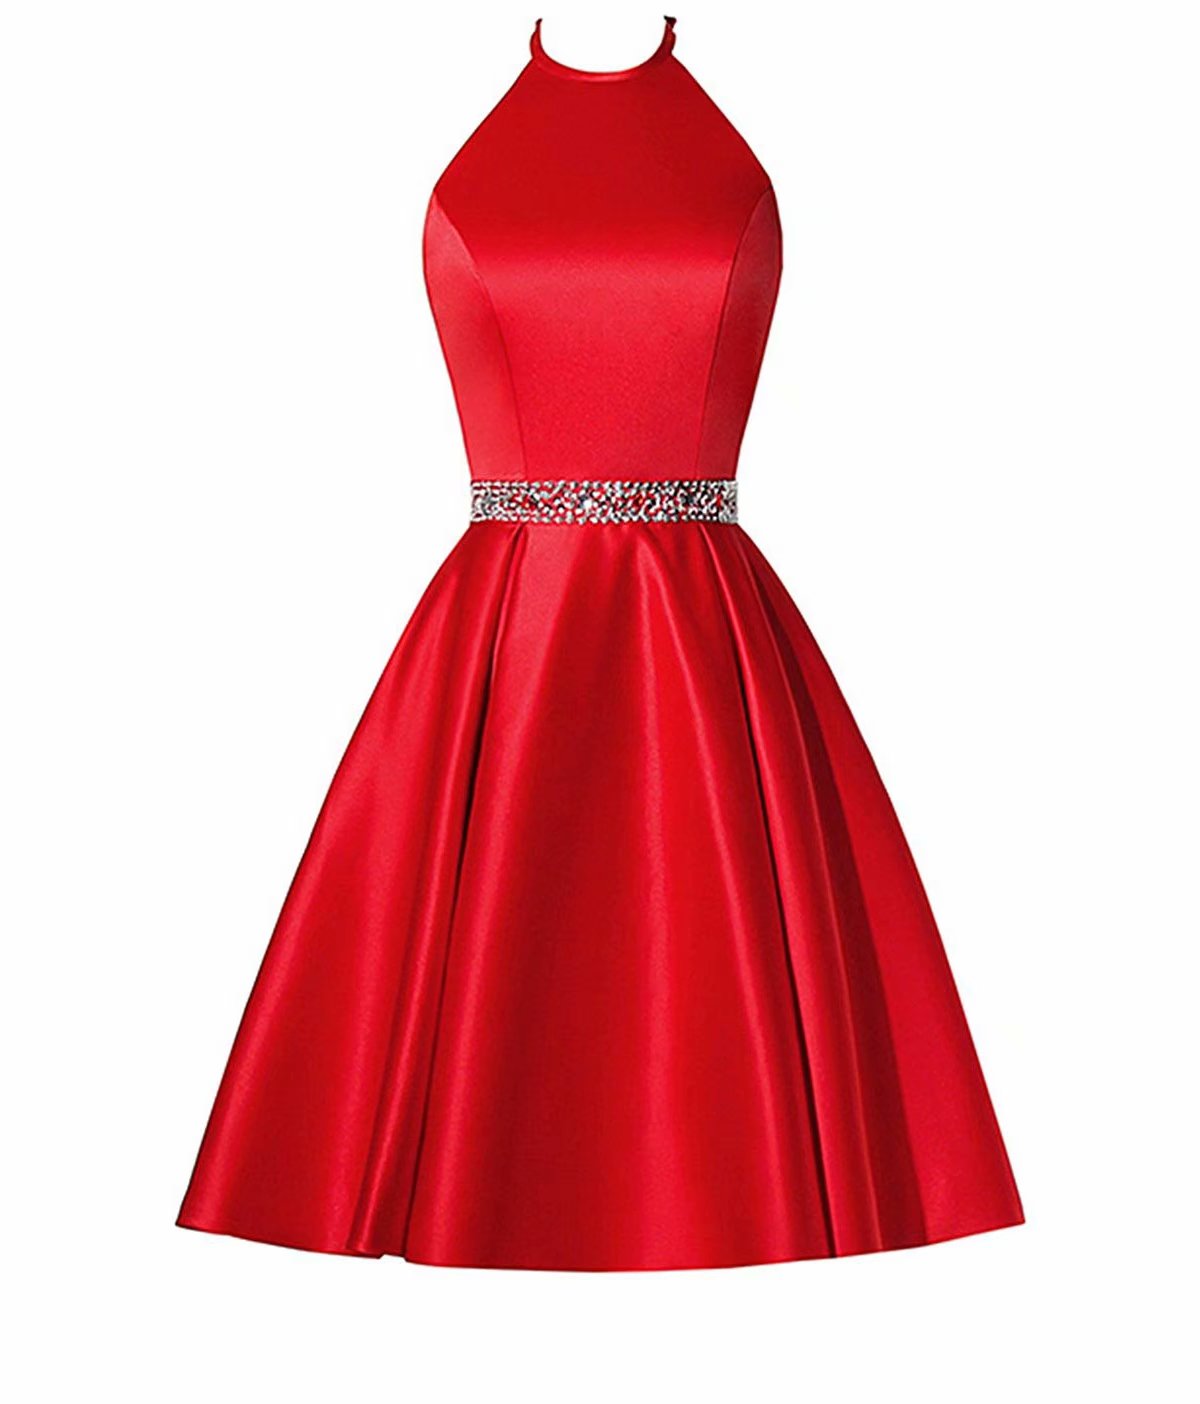 Fashion Red Short Homecoming Dress Halter Neck Beading Evening Cocktail Gown Bridesmaid Formal Dresses